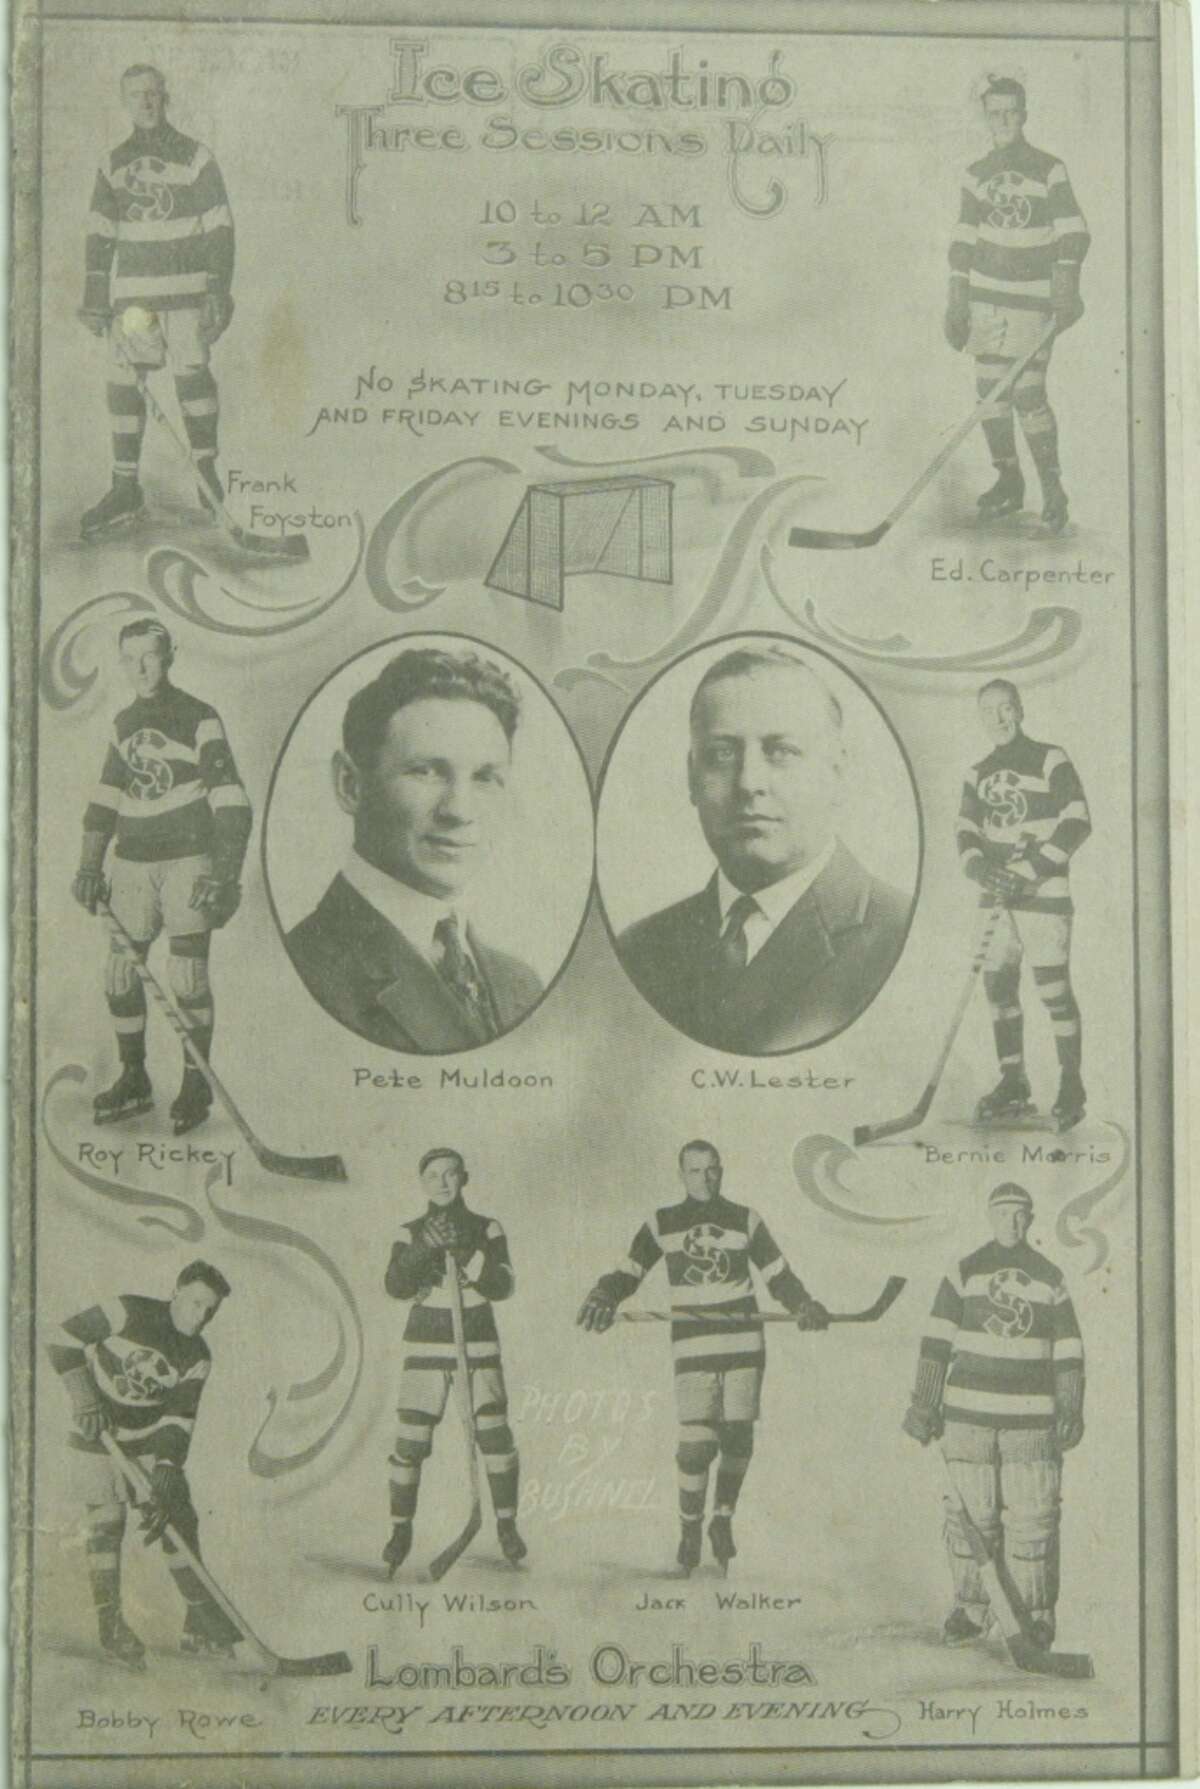 1916-17 Metropolitans In its second year of existence, Seattle's first big-league hockey team -- and its last -- won the city's first national championship. It was the days before the NHL, and the 16-8 Mets won the Stanley Cup and finished first in the Pacific Coast Hockey Association. Before the PCHA folded in 1924, the Metropolitans also made the playoffs in: - 1917-18: Finished 11-7, first in PCHA, lost PCHA finals. - 1918-19: Finished 11-9, second in PCHA, no decision in Stanley Cup final. - 1919-20: Finished 12-10, first in PCHA, lost Stanley Cup final. - 1921-22: Finished 12-11, first in PCHA, lost PCHA final. - 1923-24: Finished 14-16, first in PCHA, lost PCHA final.